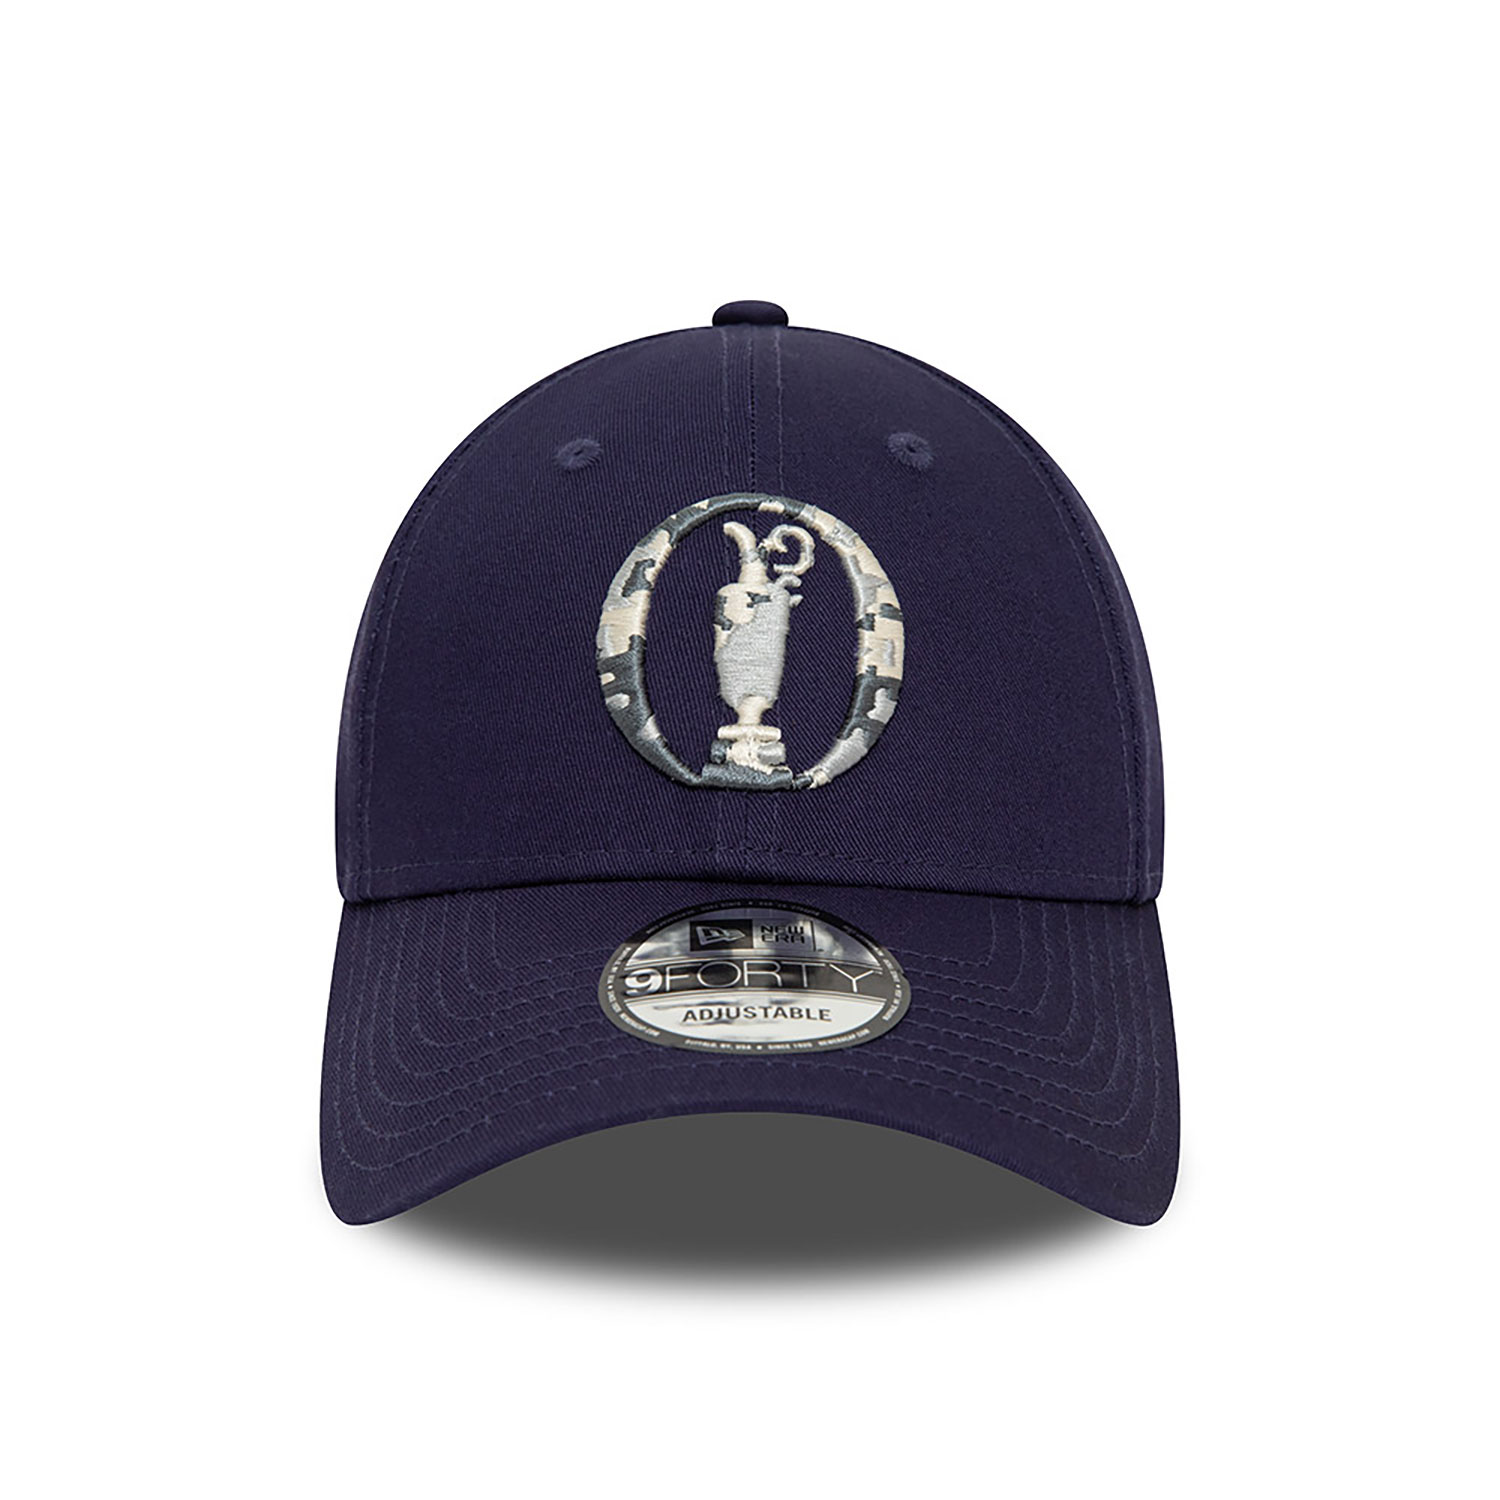 The Open Championship Camo Infill Navy 9FORTY Adjustable Cap